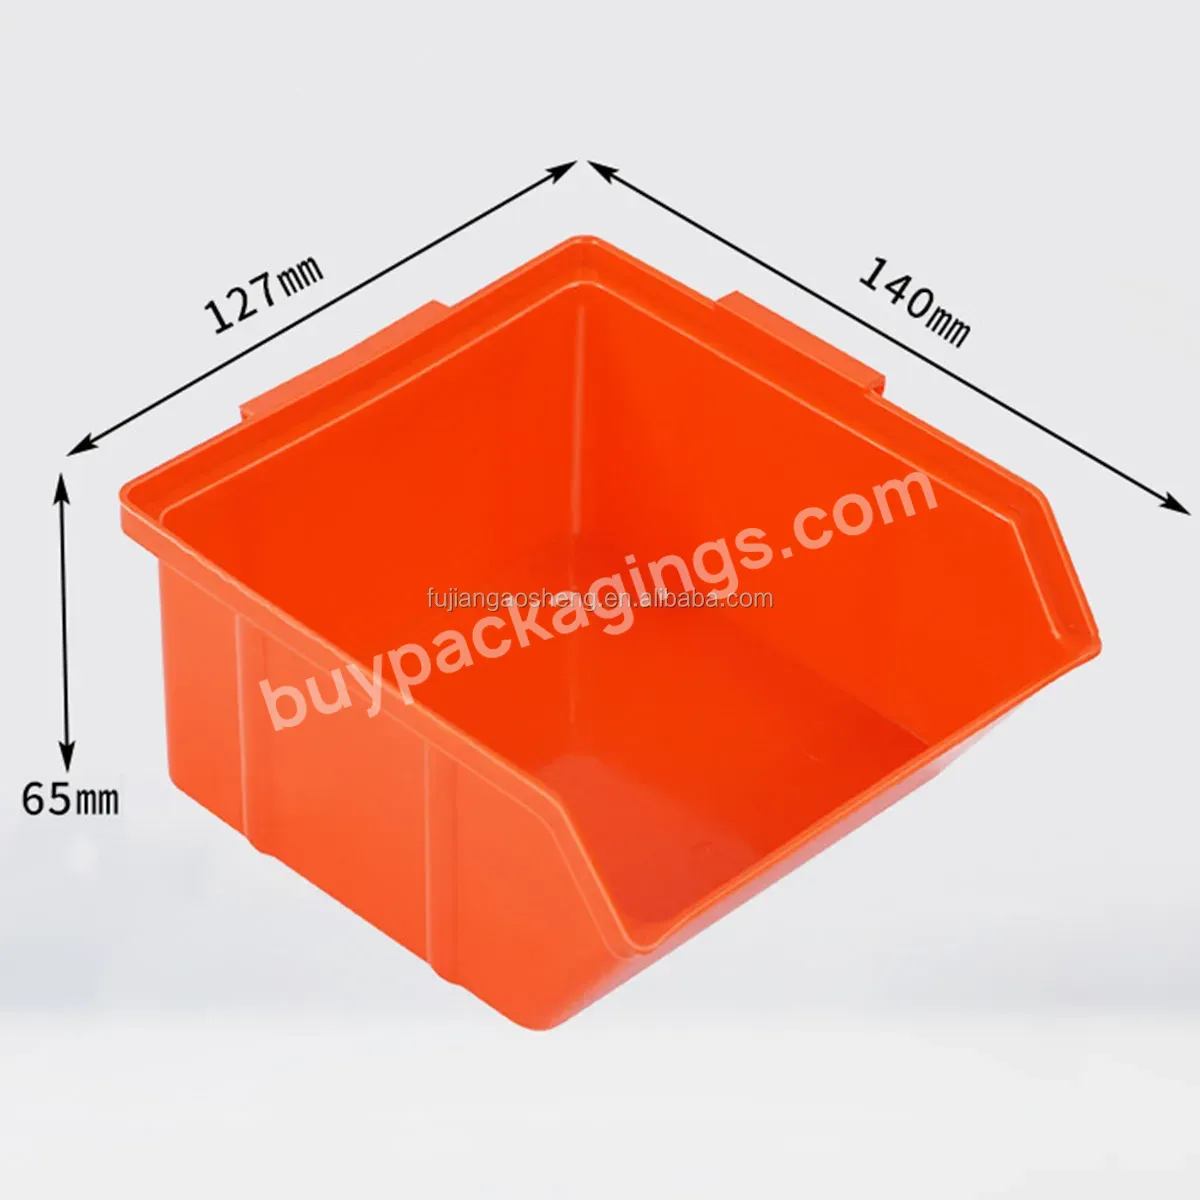 Cheap Price Shelf Bins For Industrial Plastic Portable Boxes Plastic Stackable And Hanging Divisible Storage Shelf Bins - Buy Plastic Storage Bins Suspended Bevel Box,Cheap Plastic Storage Bins,Stackable Bread Bin.